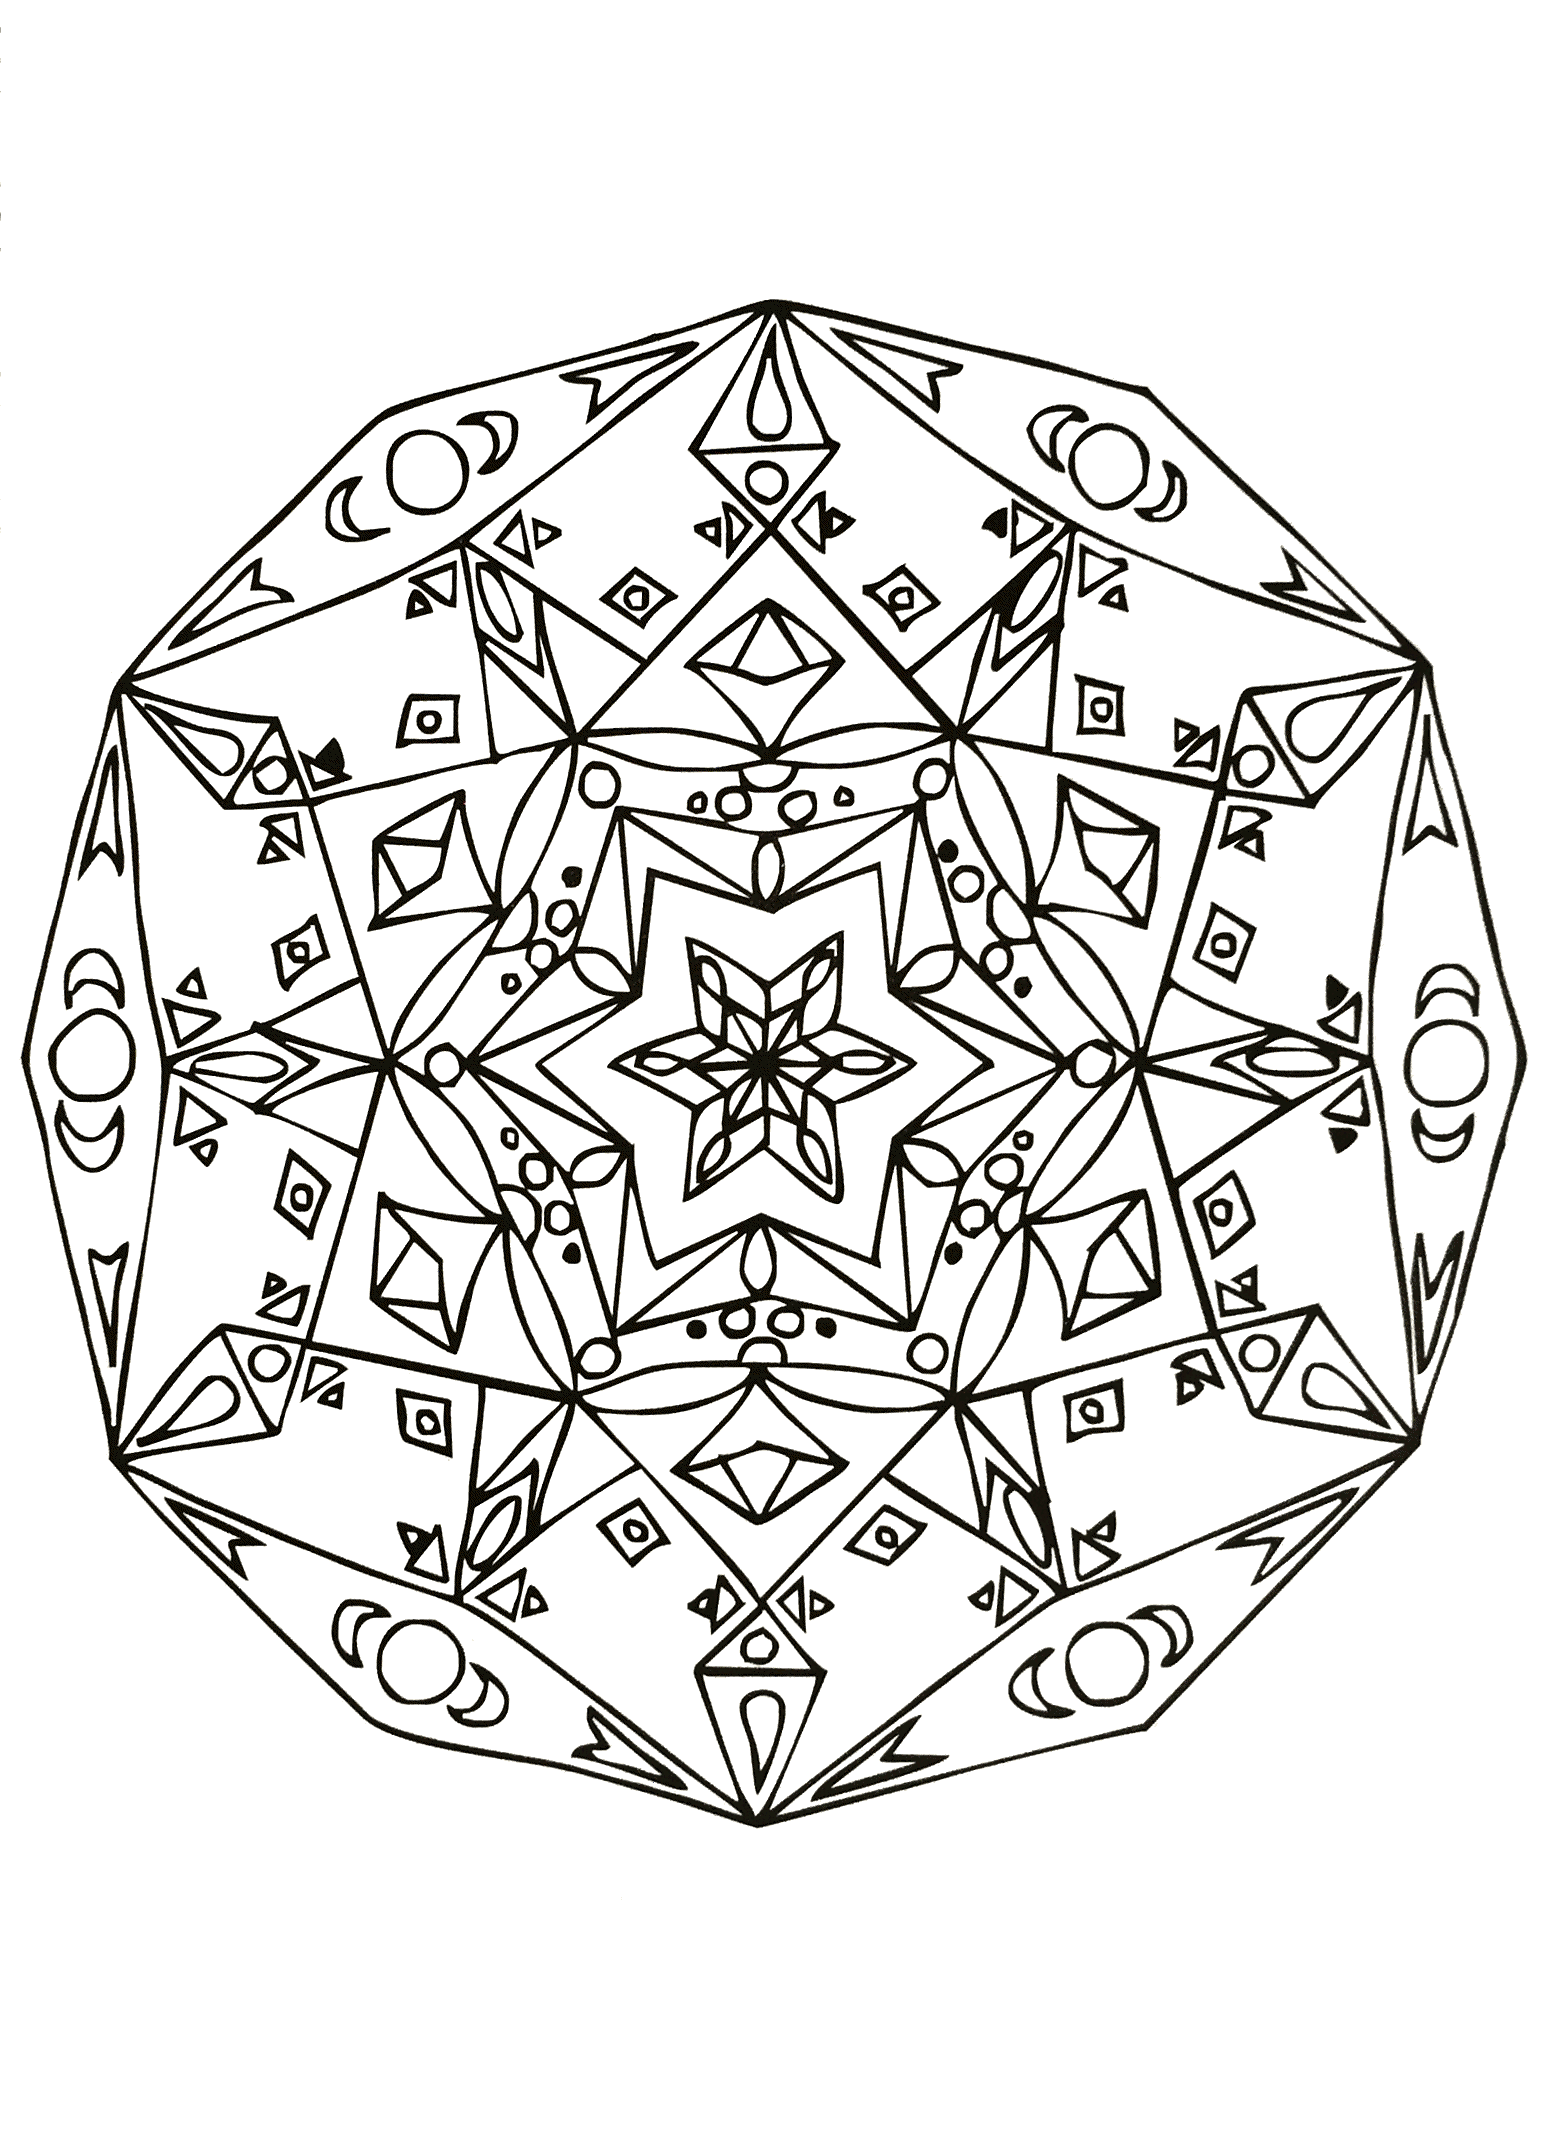 Mandalas coloring page to download for free